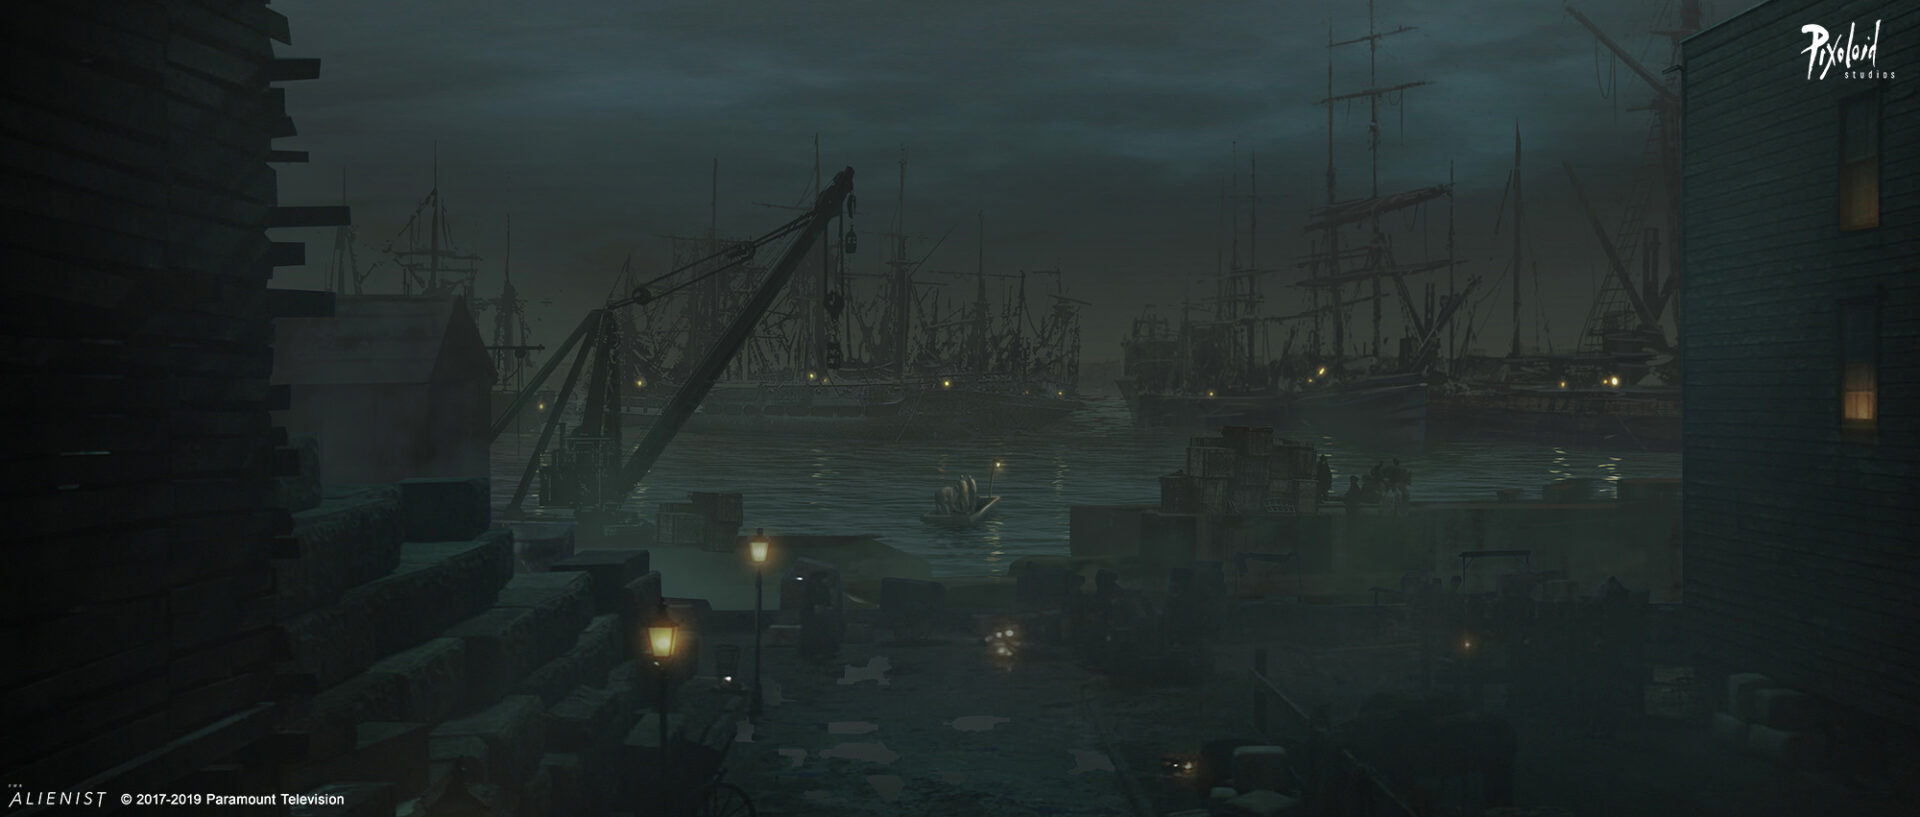 Concept art for The Alienist - Harbor at night